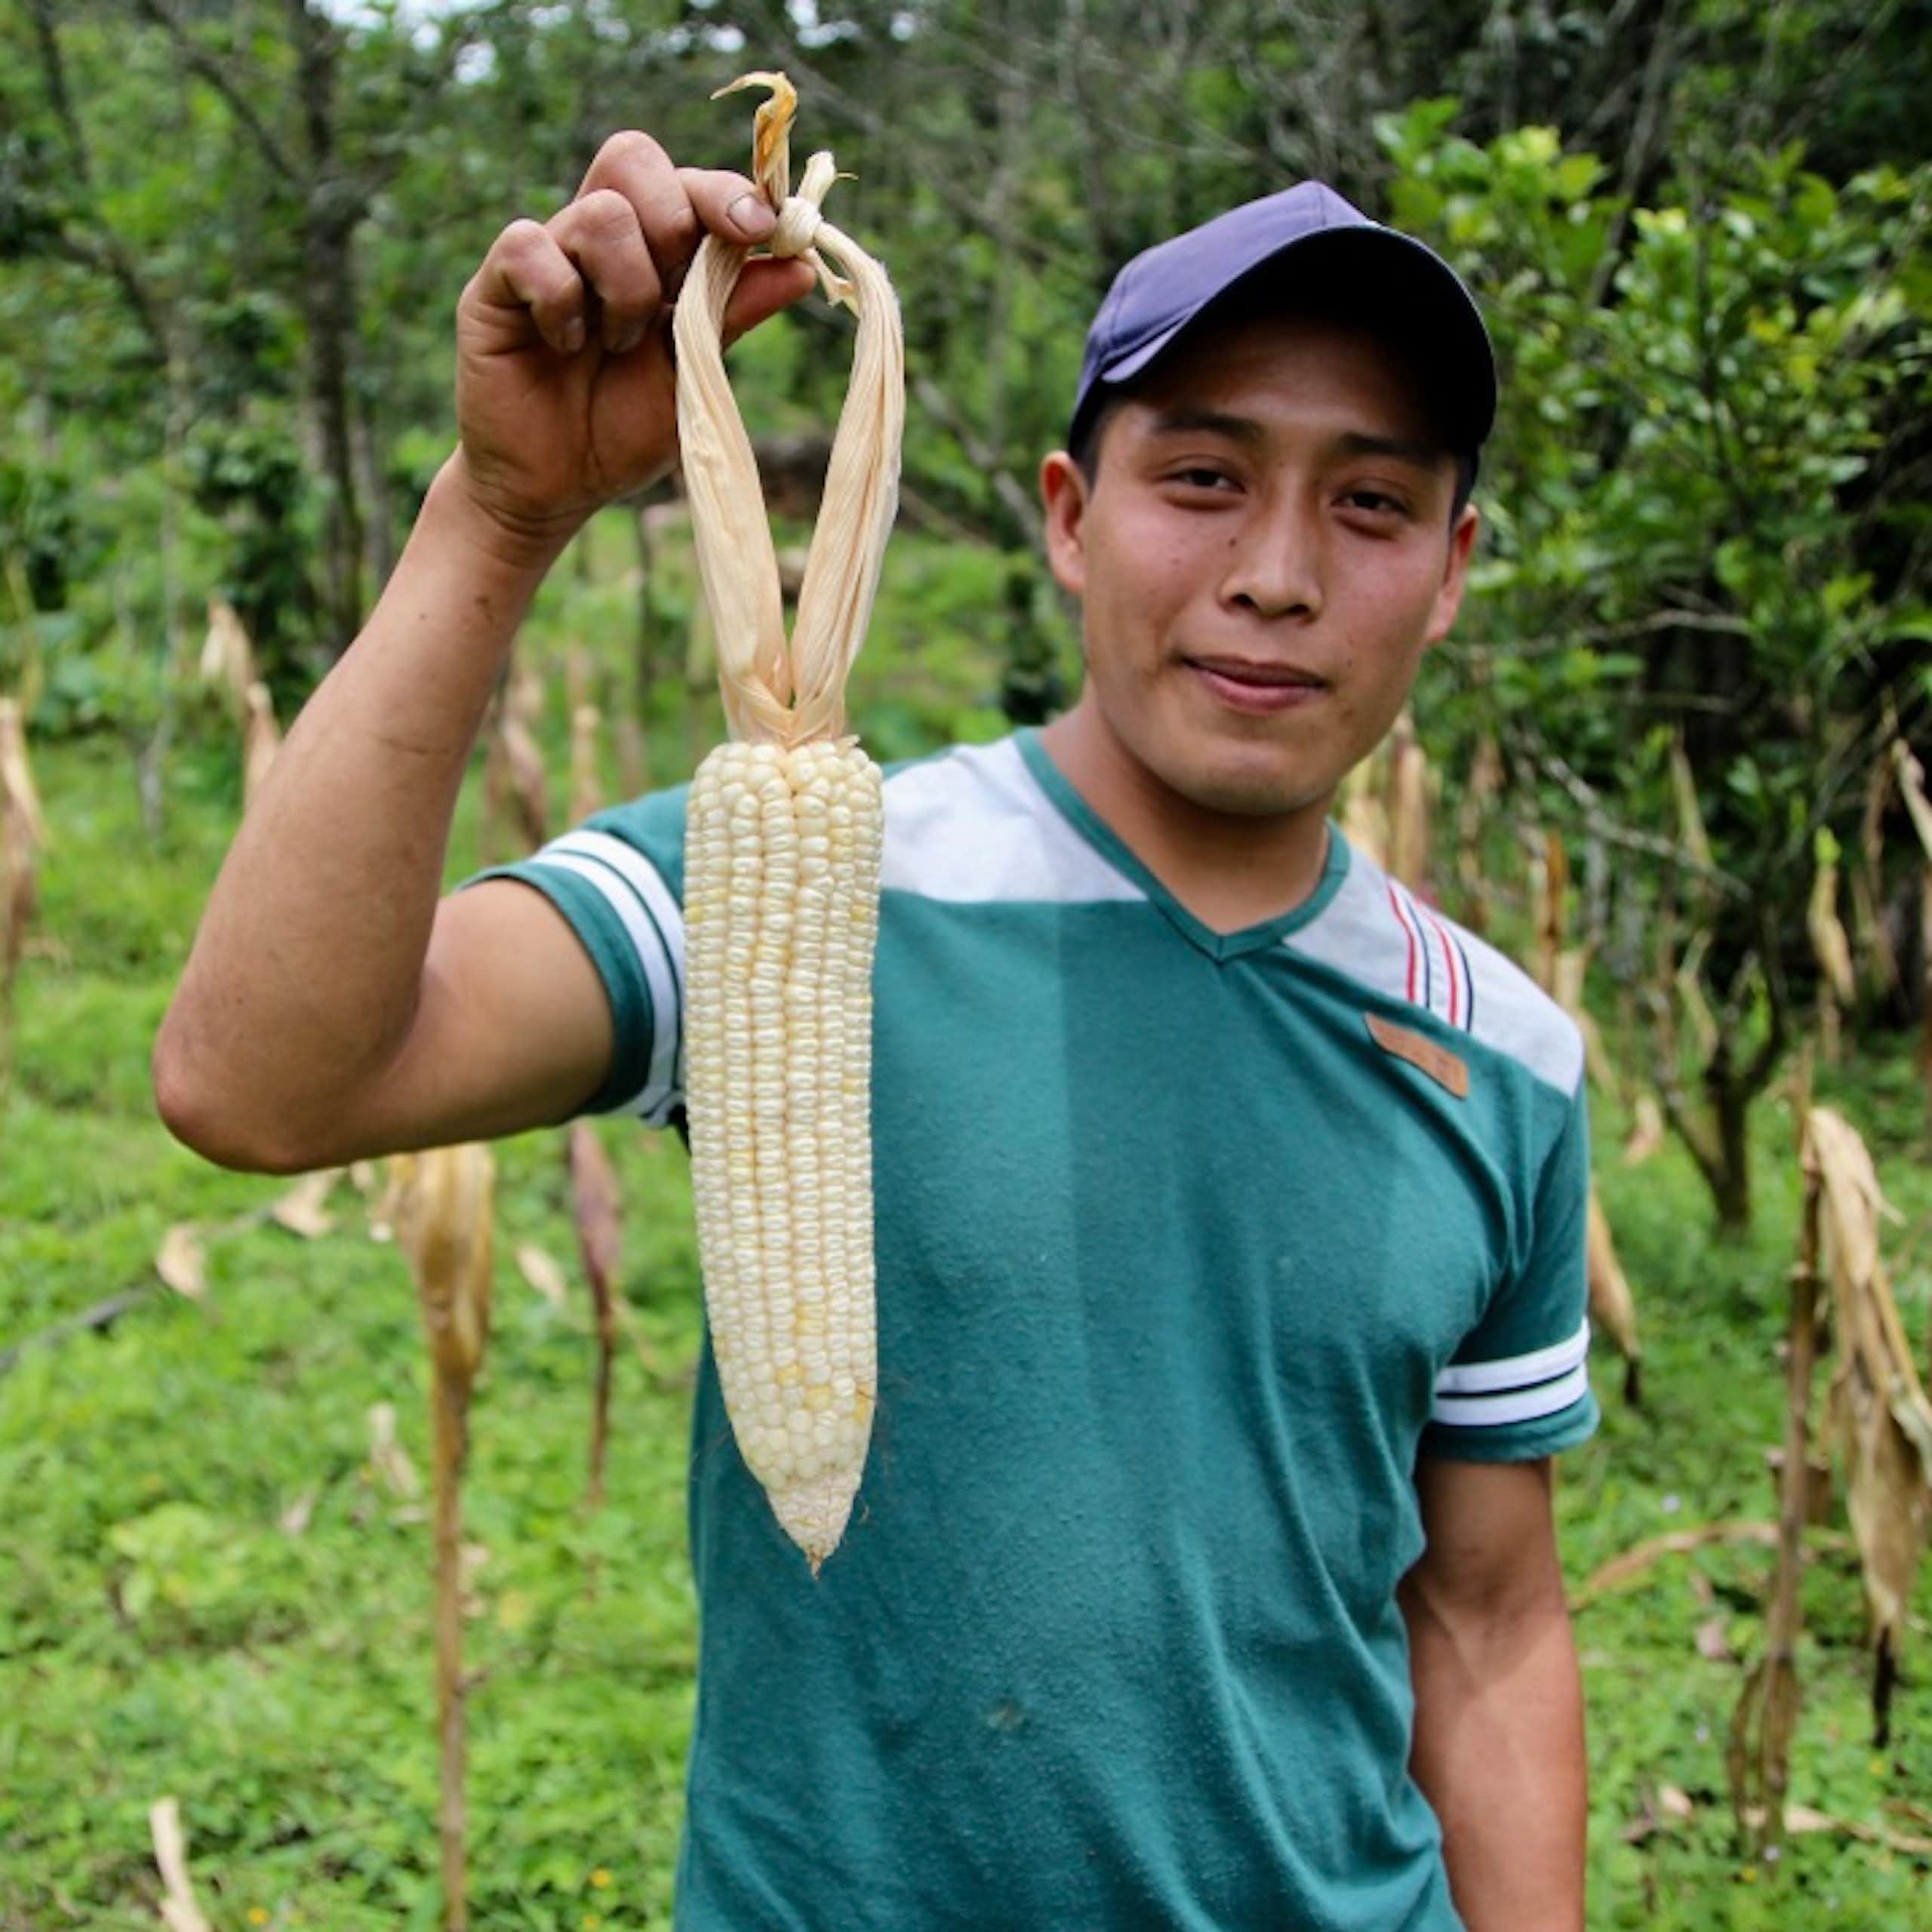 A young person holding freshly picked corn.